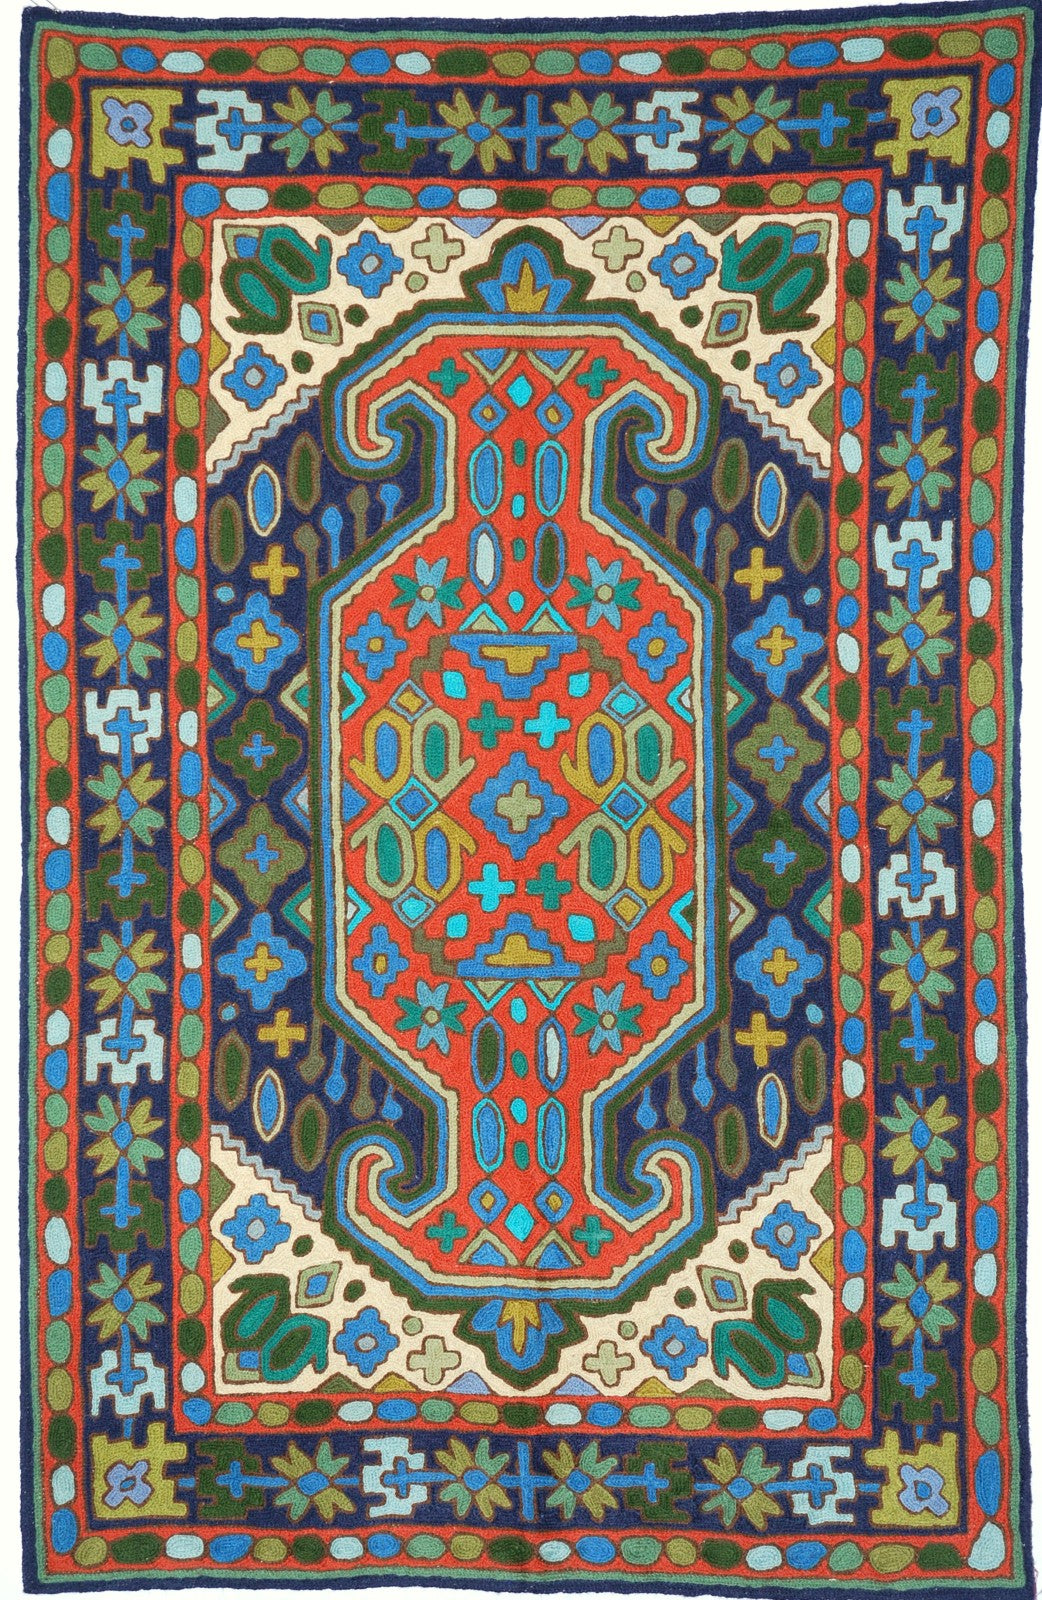 ChainStitch Tapestry Kilim Woolen Wall Hanging Area Rug, Multicolor Embroidery 2.5x4 feet #CWR10014